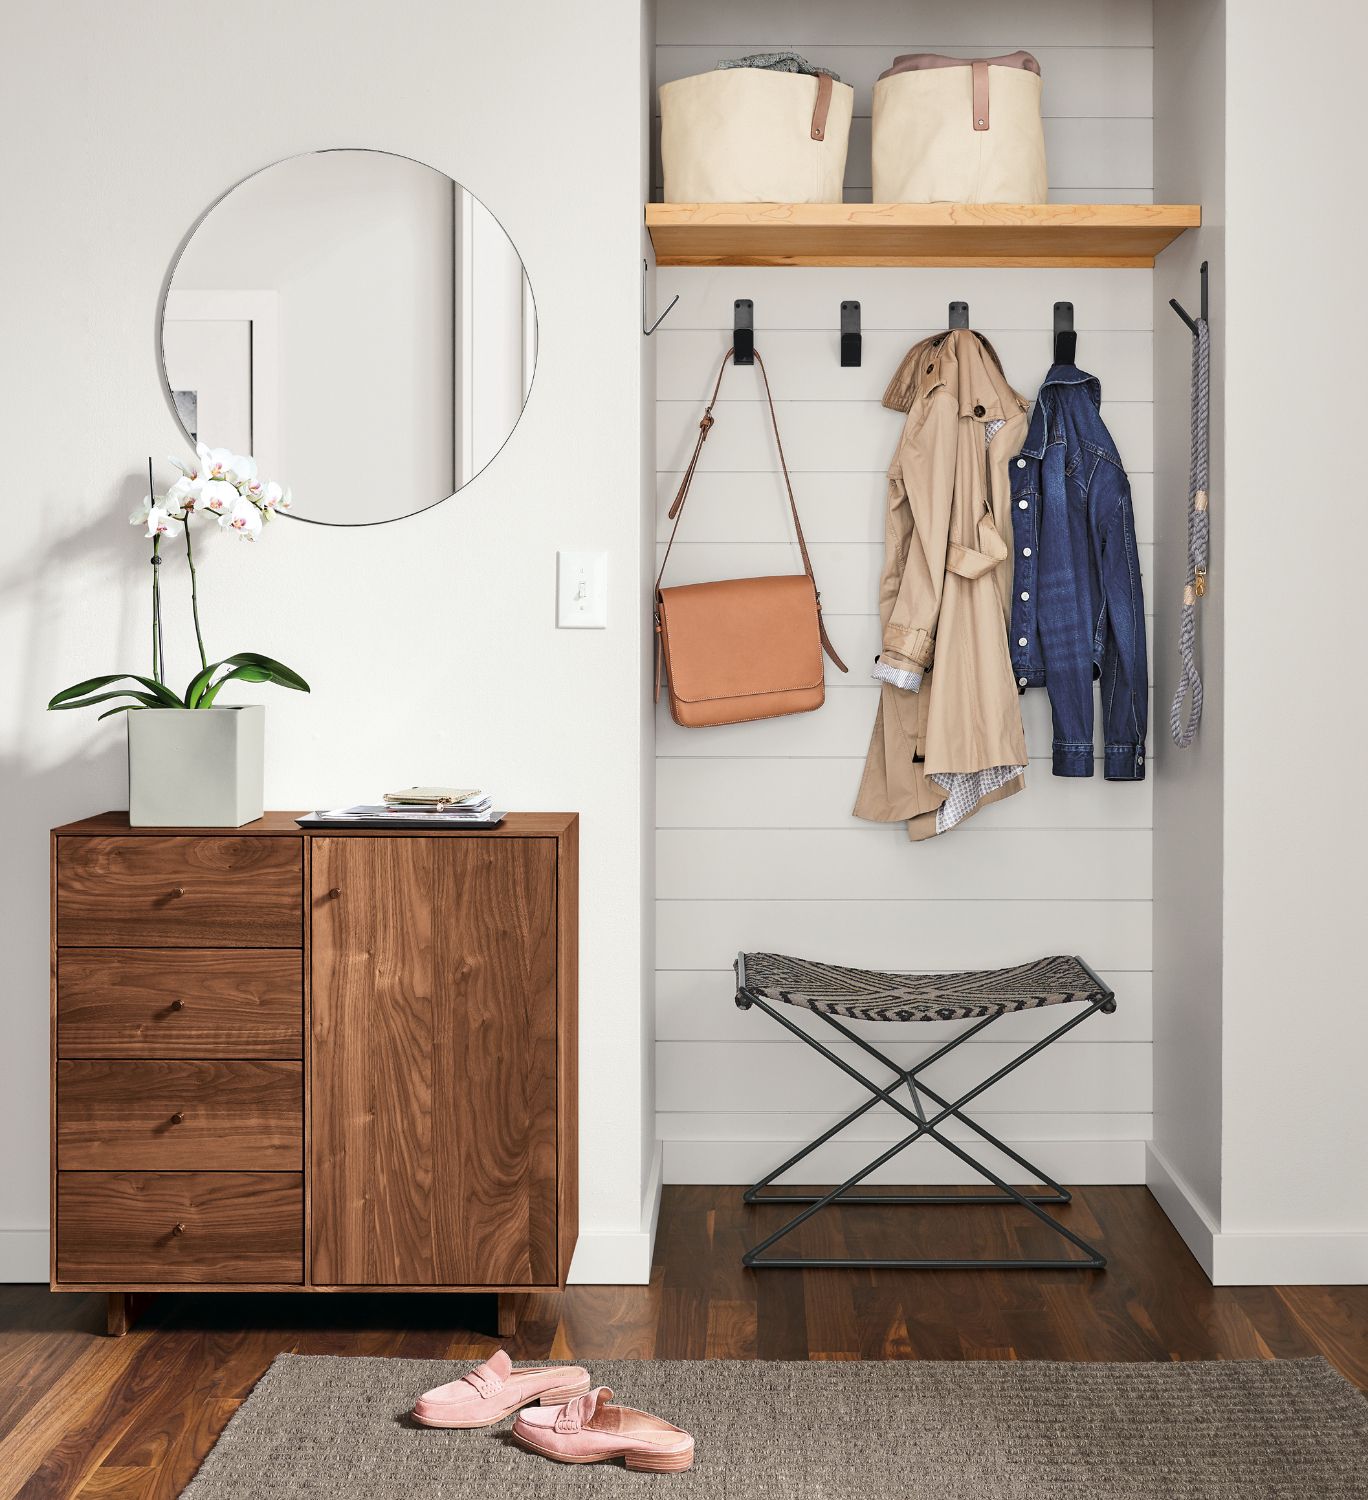 https://rnb.scene7.com/is/image/roomandboard/IA_smEntry_Org_strHudson?size=684,750&scl=1